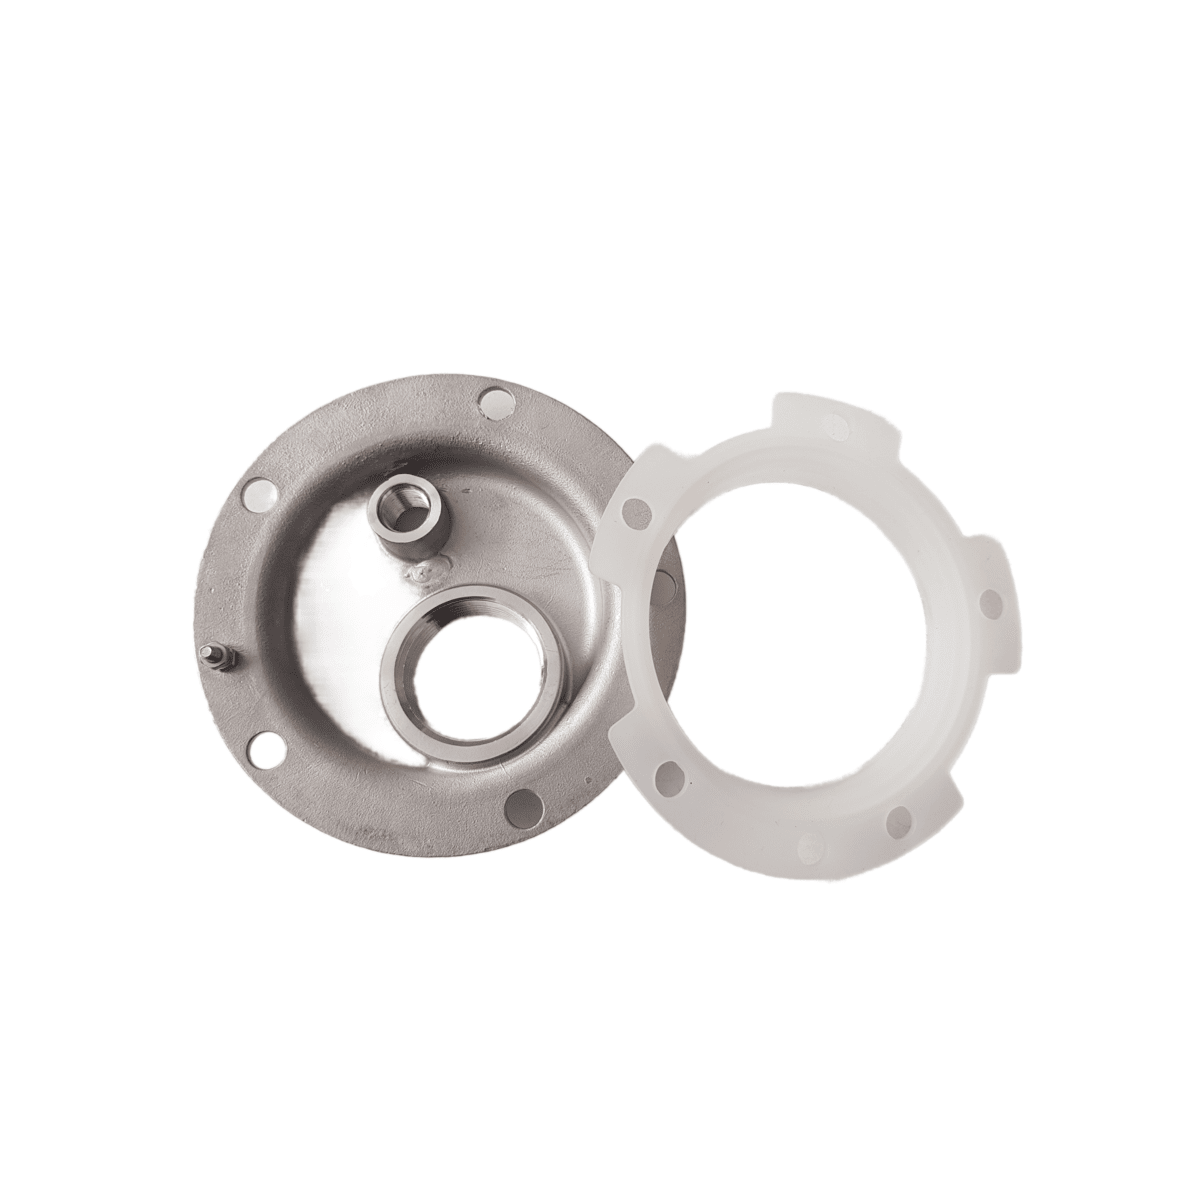 Geyserwise Stainless Steel 5 Hole Flange